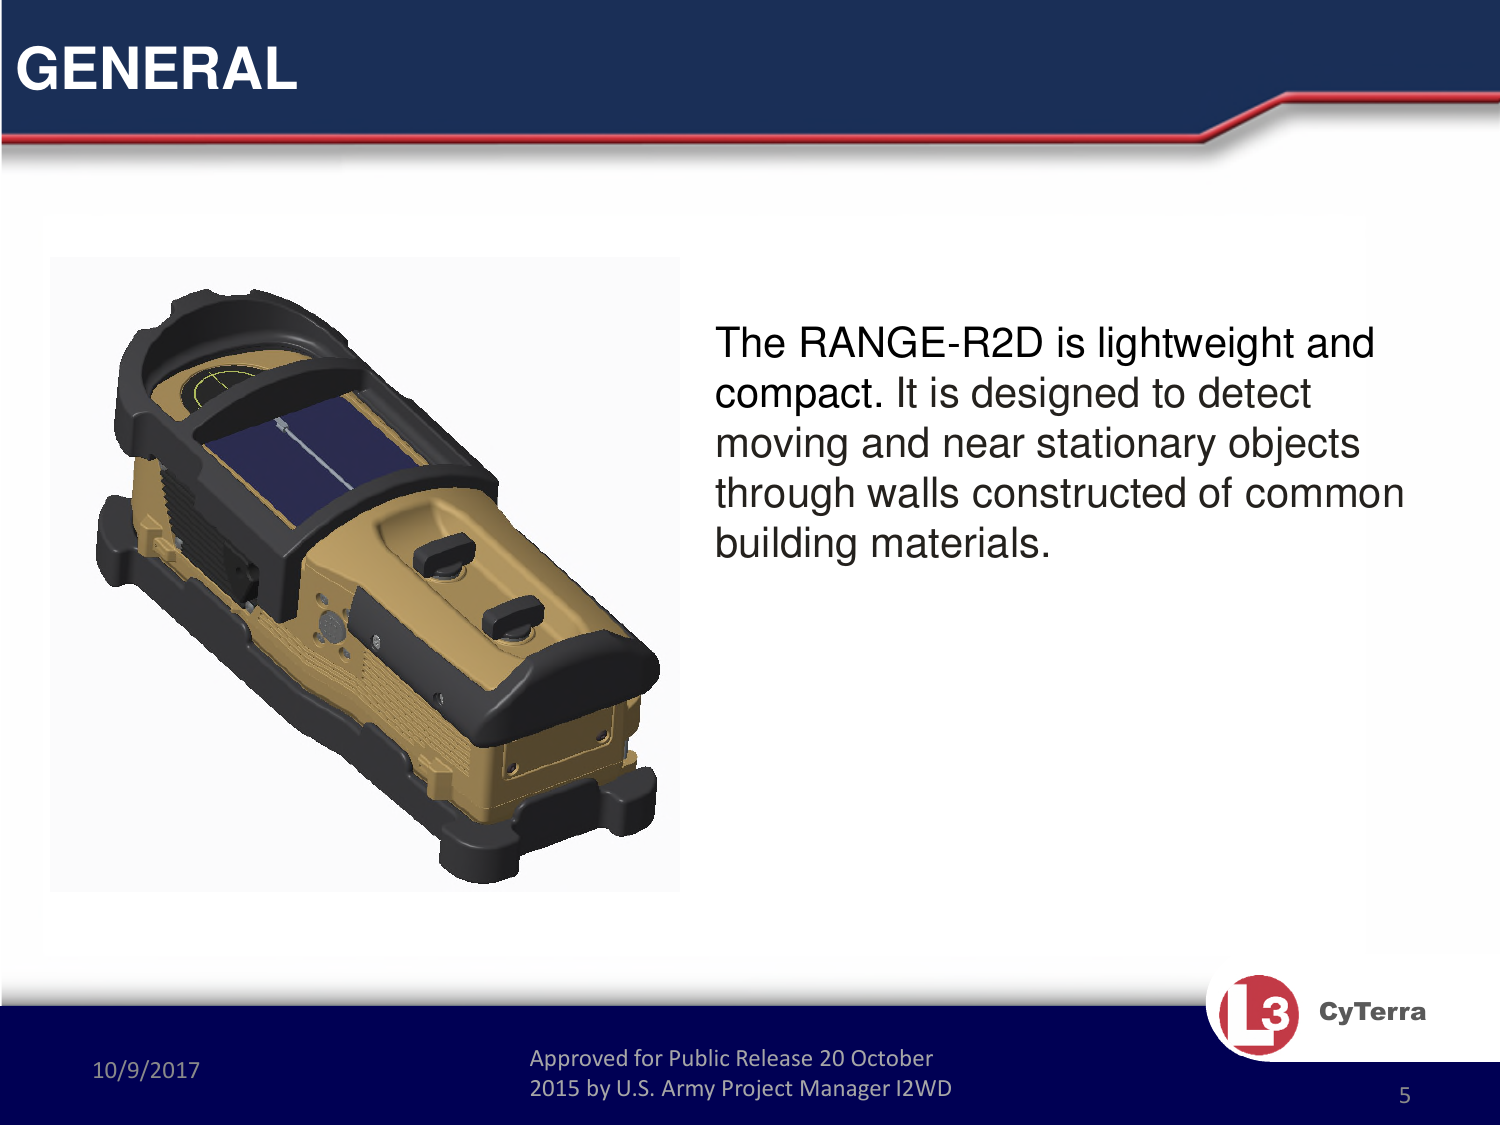 Approved for Public Release 20 October 2015 by U.S. Army Project Manager I2WD10/9/2017 Approved for Public Release 20 October 2015 by U.S. Army Project Manager I2WD 5CyTerraThe RANGE-R2D is lightweight and compact. It is designed to detect moving and near stationary objects through walls constructed of common building materials.GENERAL